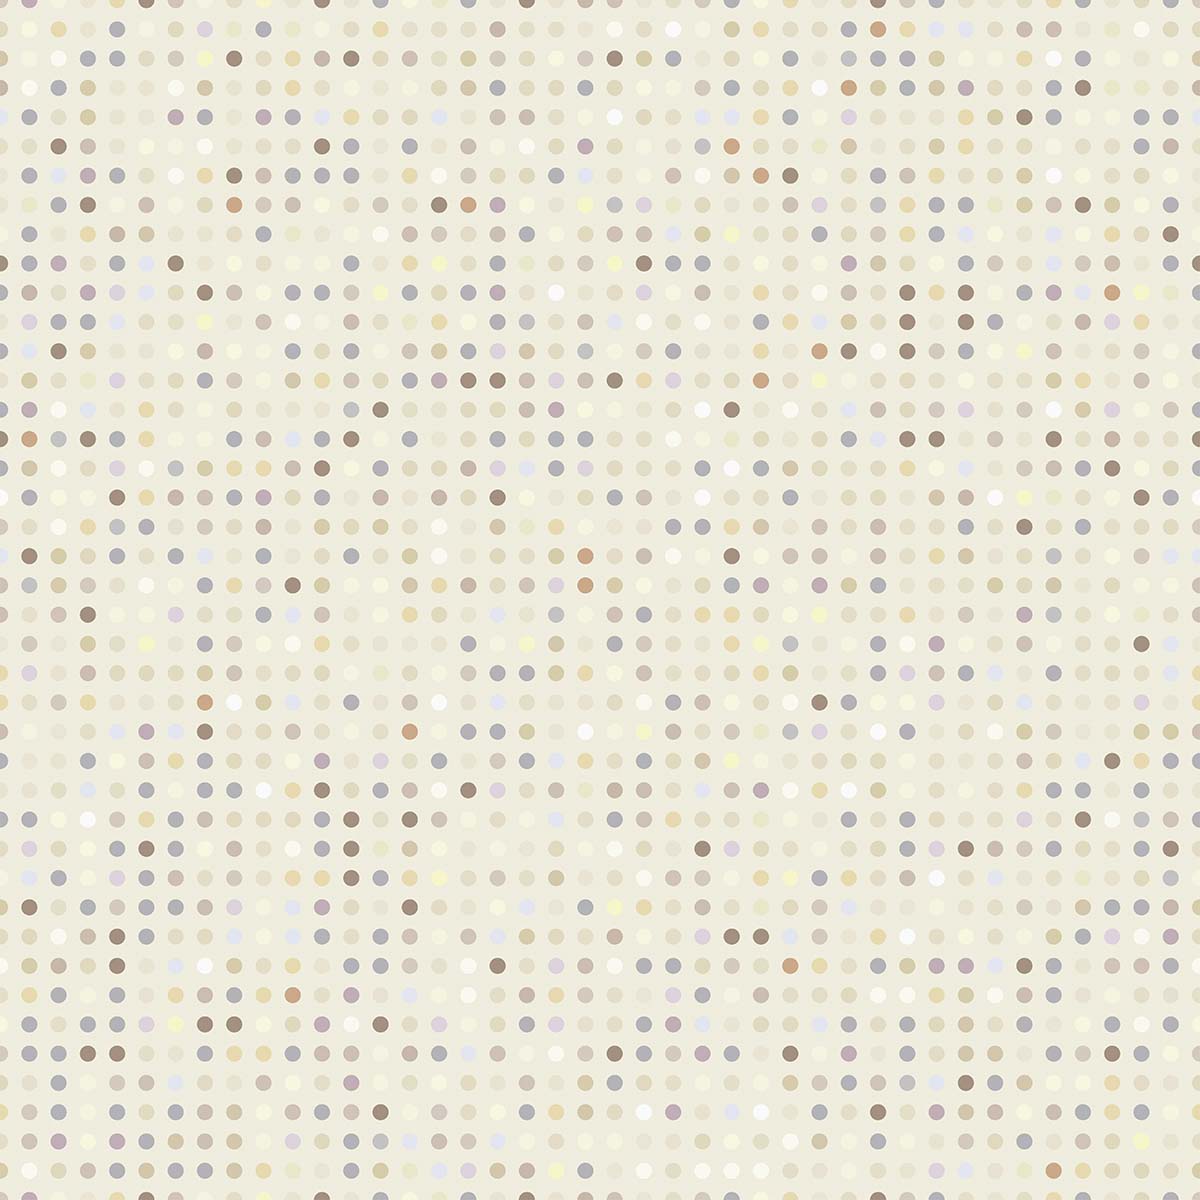 A white background with many small dots